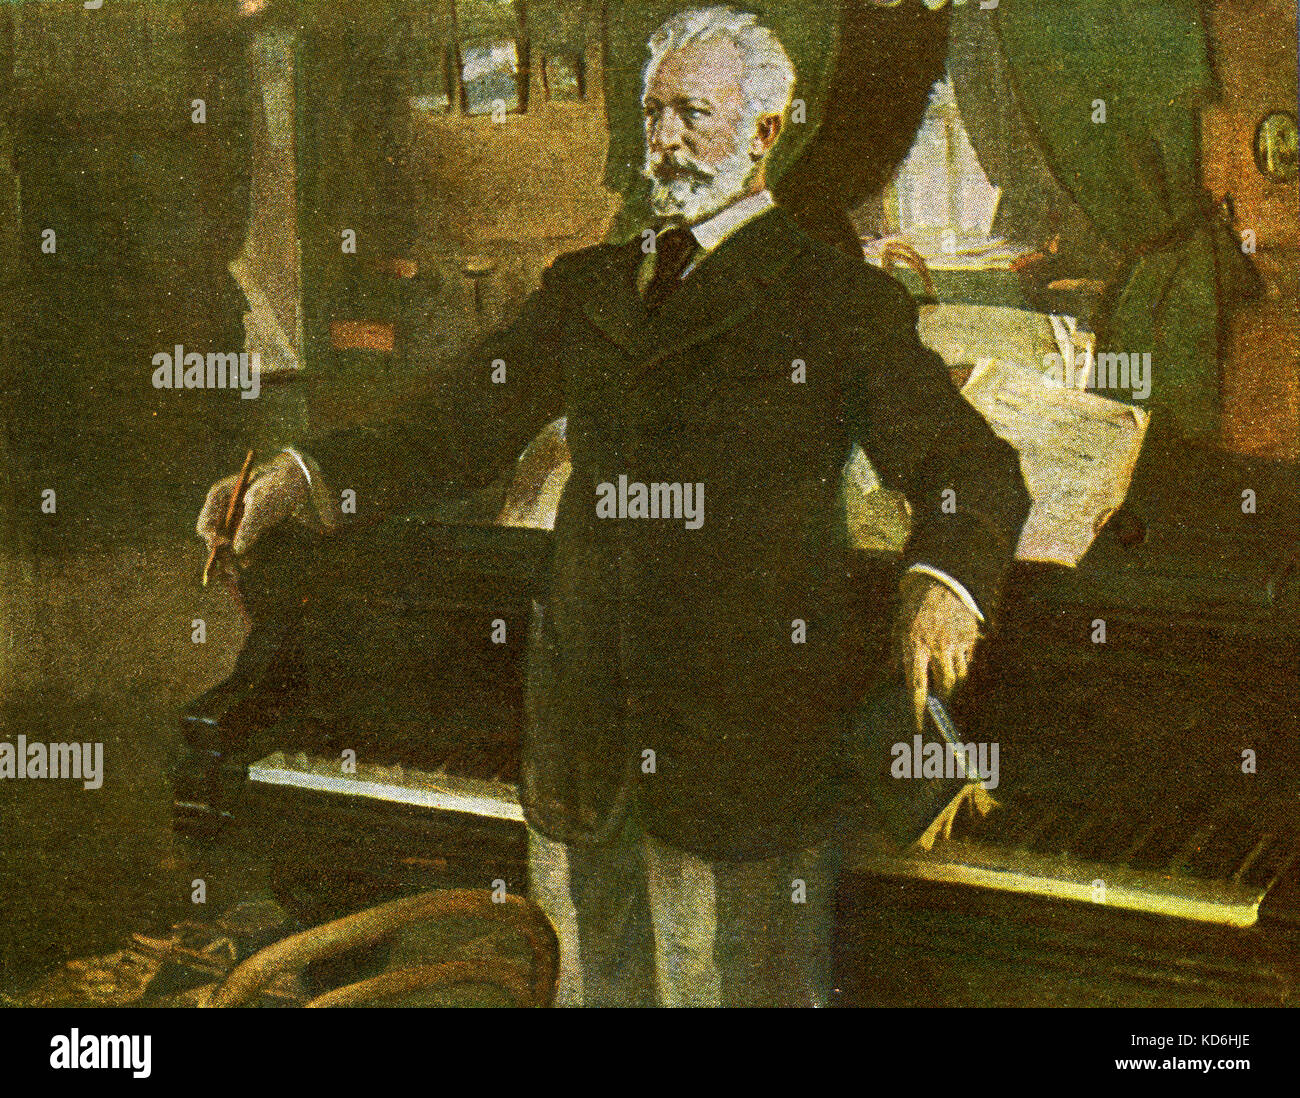 Tchaikovsky standing composing at the piano by V S Svarog (artist dates not known).  Russian composer,  7 May 1840 - 6 November 1893. Stock Photo